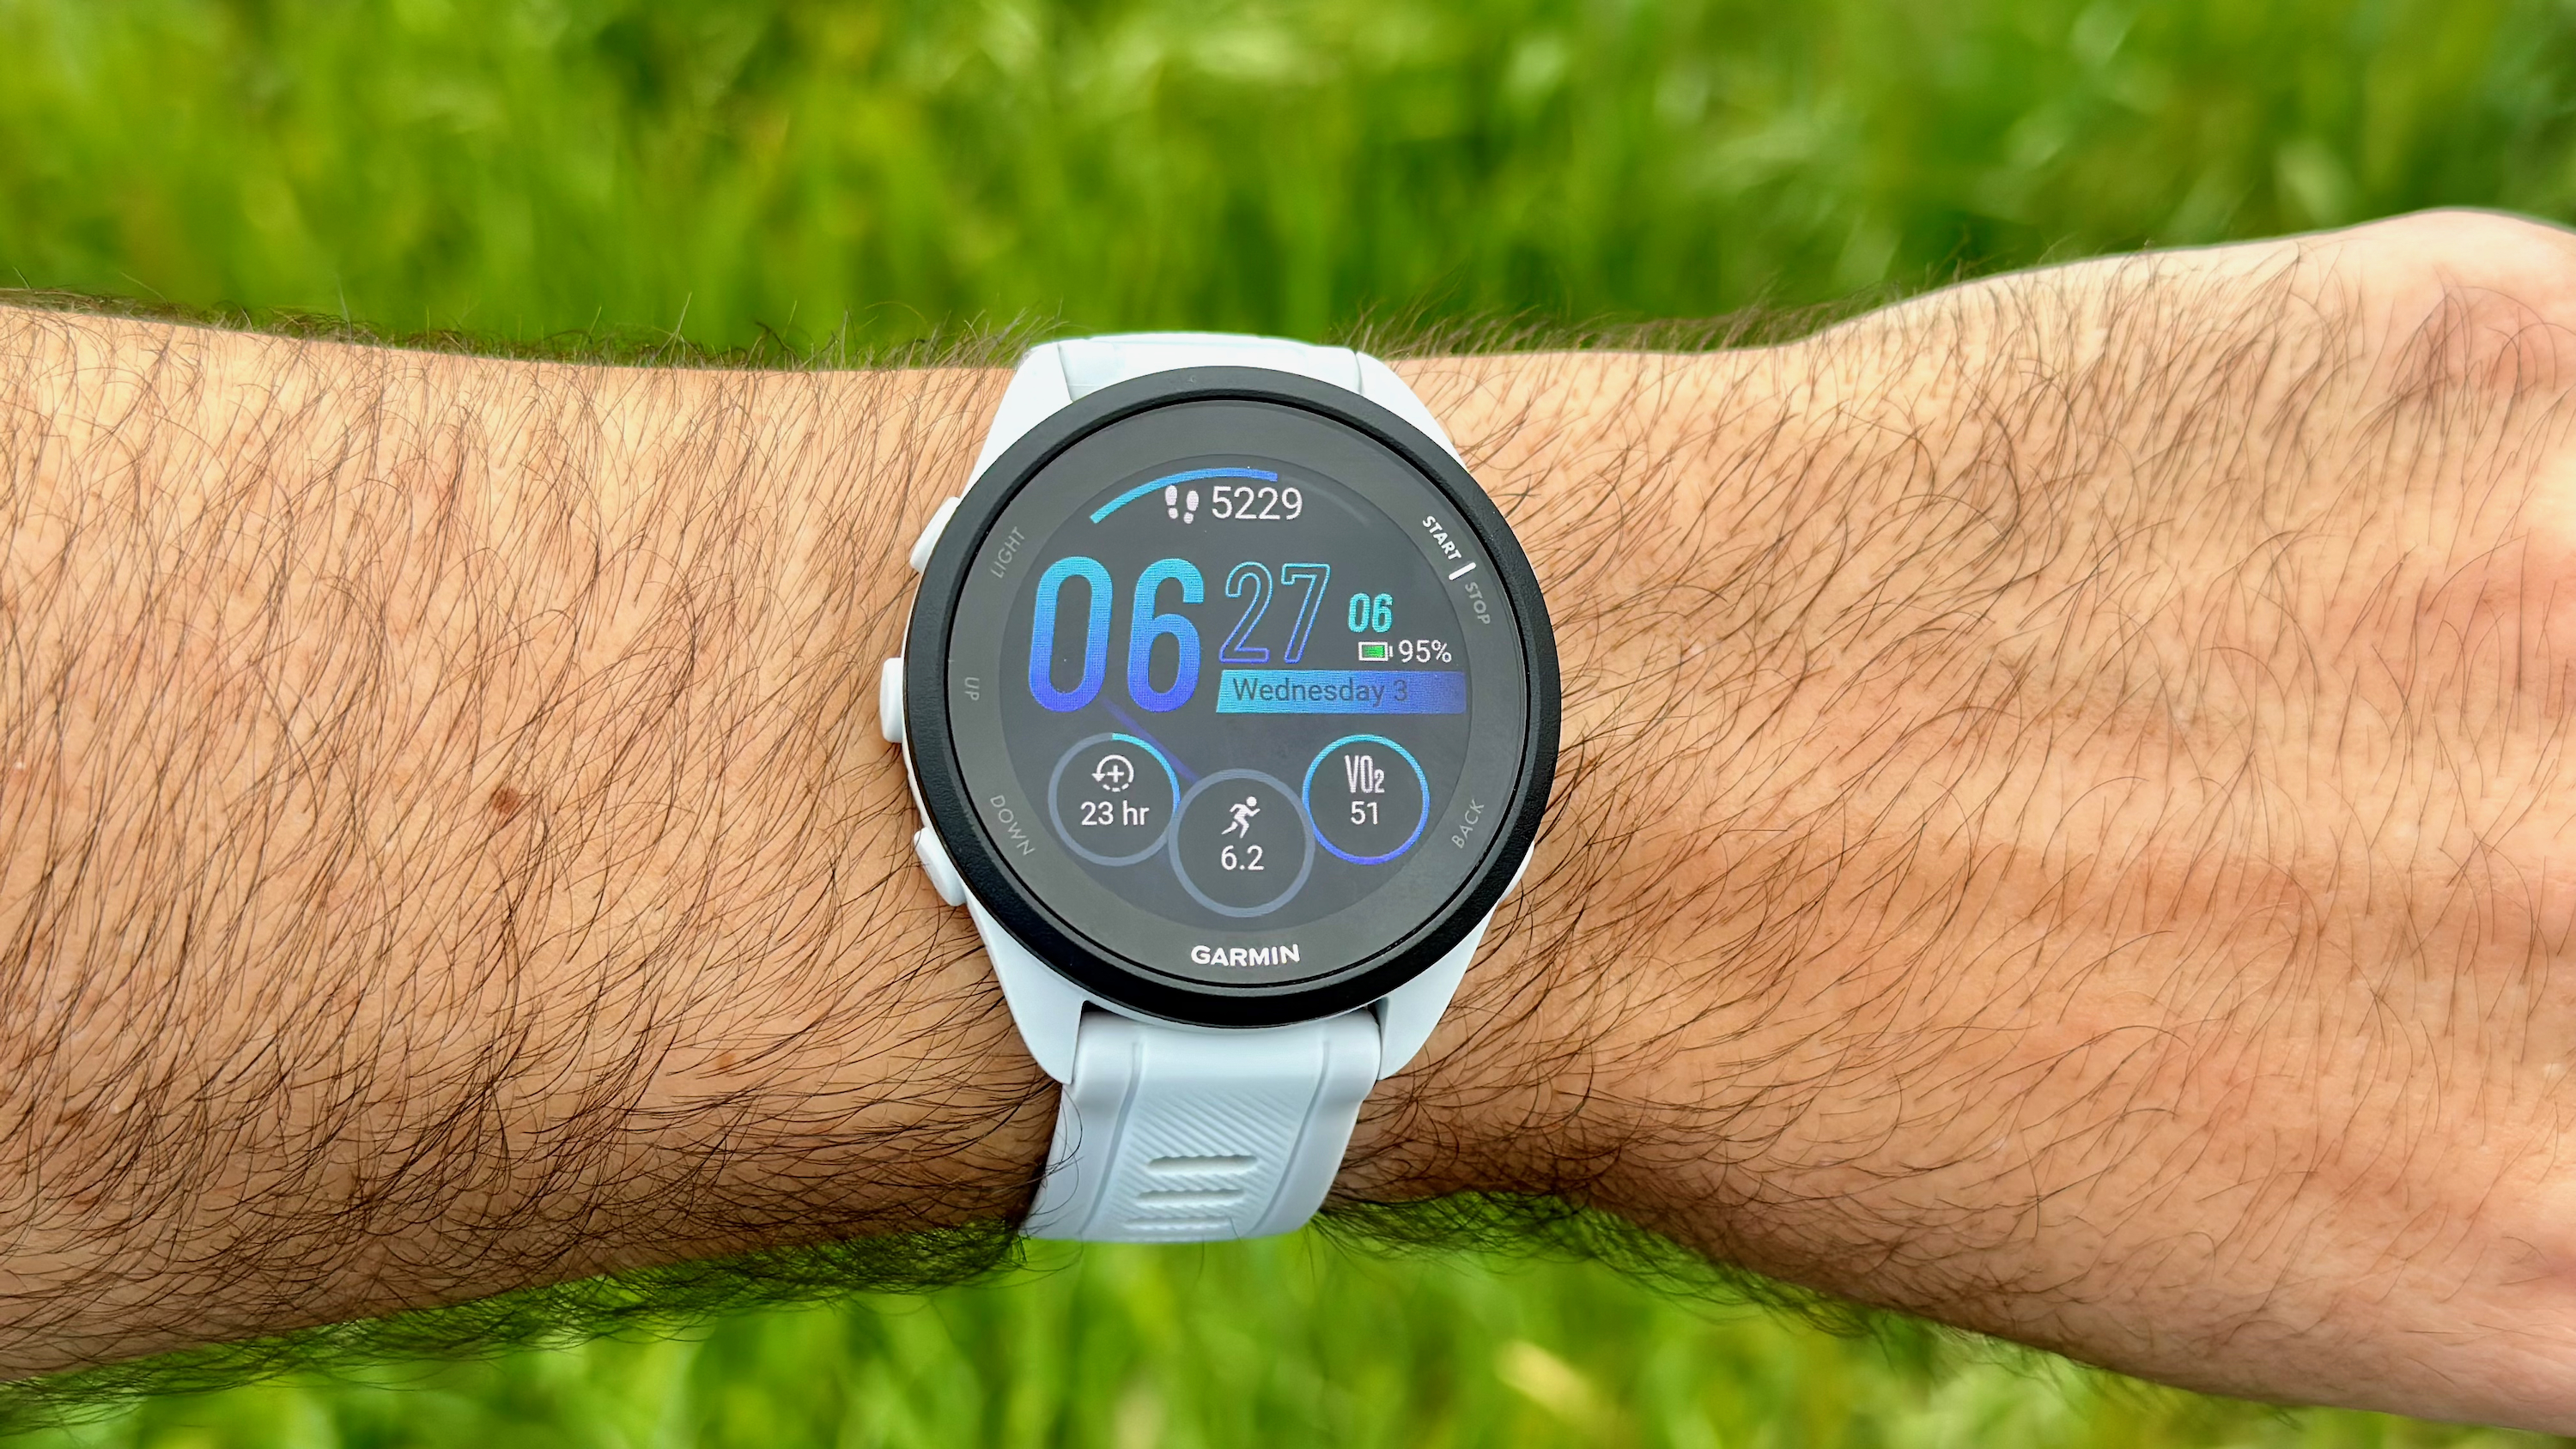 Close up of the Garmin Forerunner 165's default watch face, showing steps, the time, miles run that week, recovery time estimate, and VO2 Max estimate.